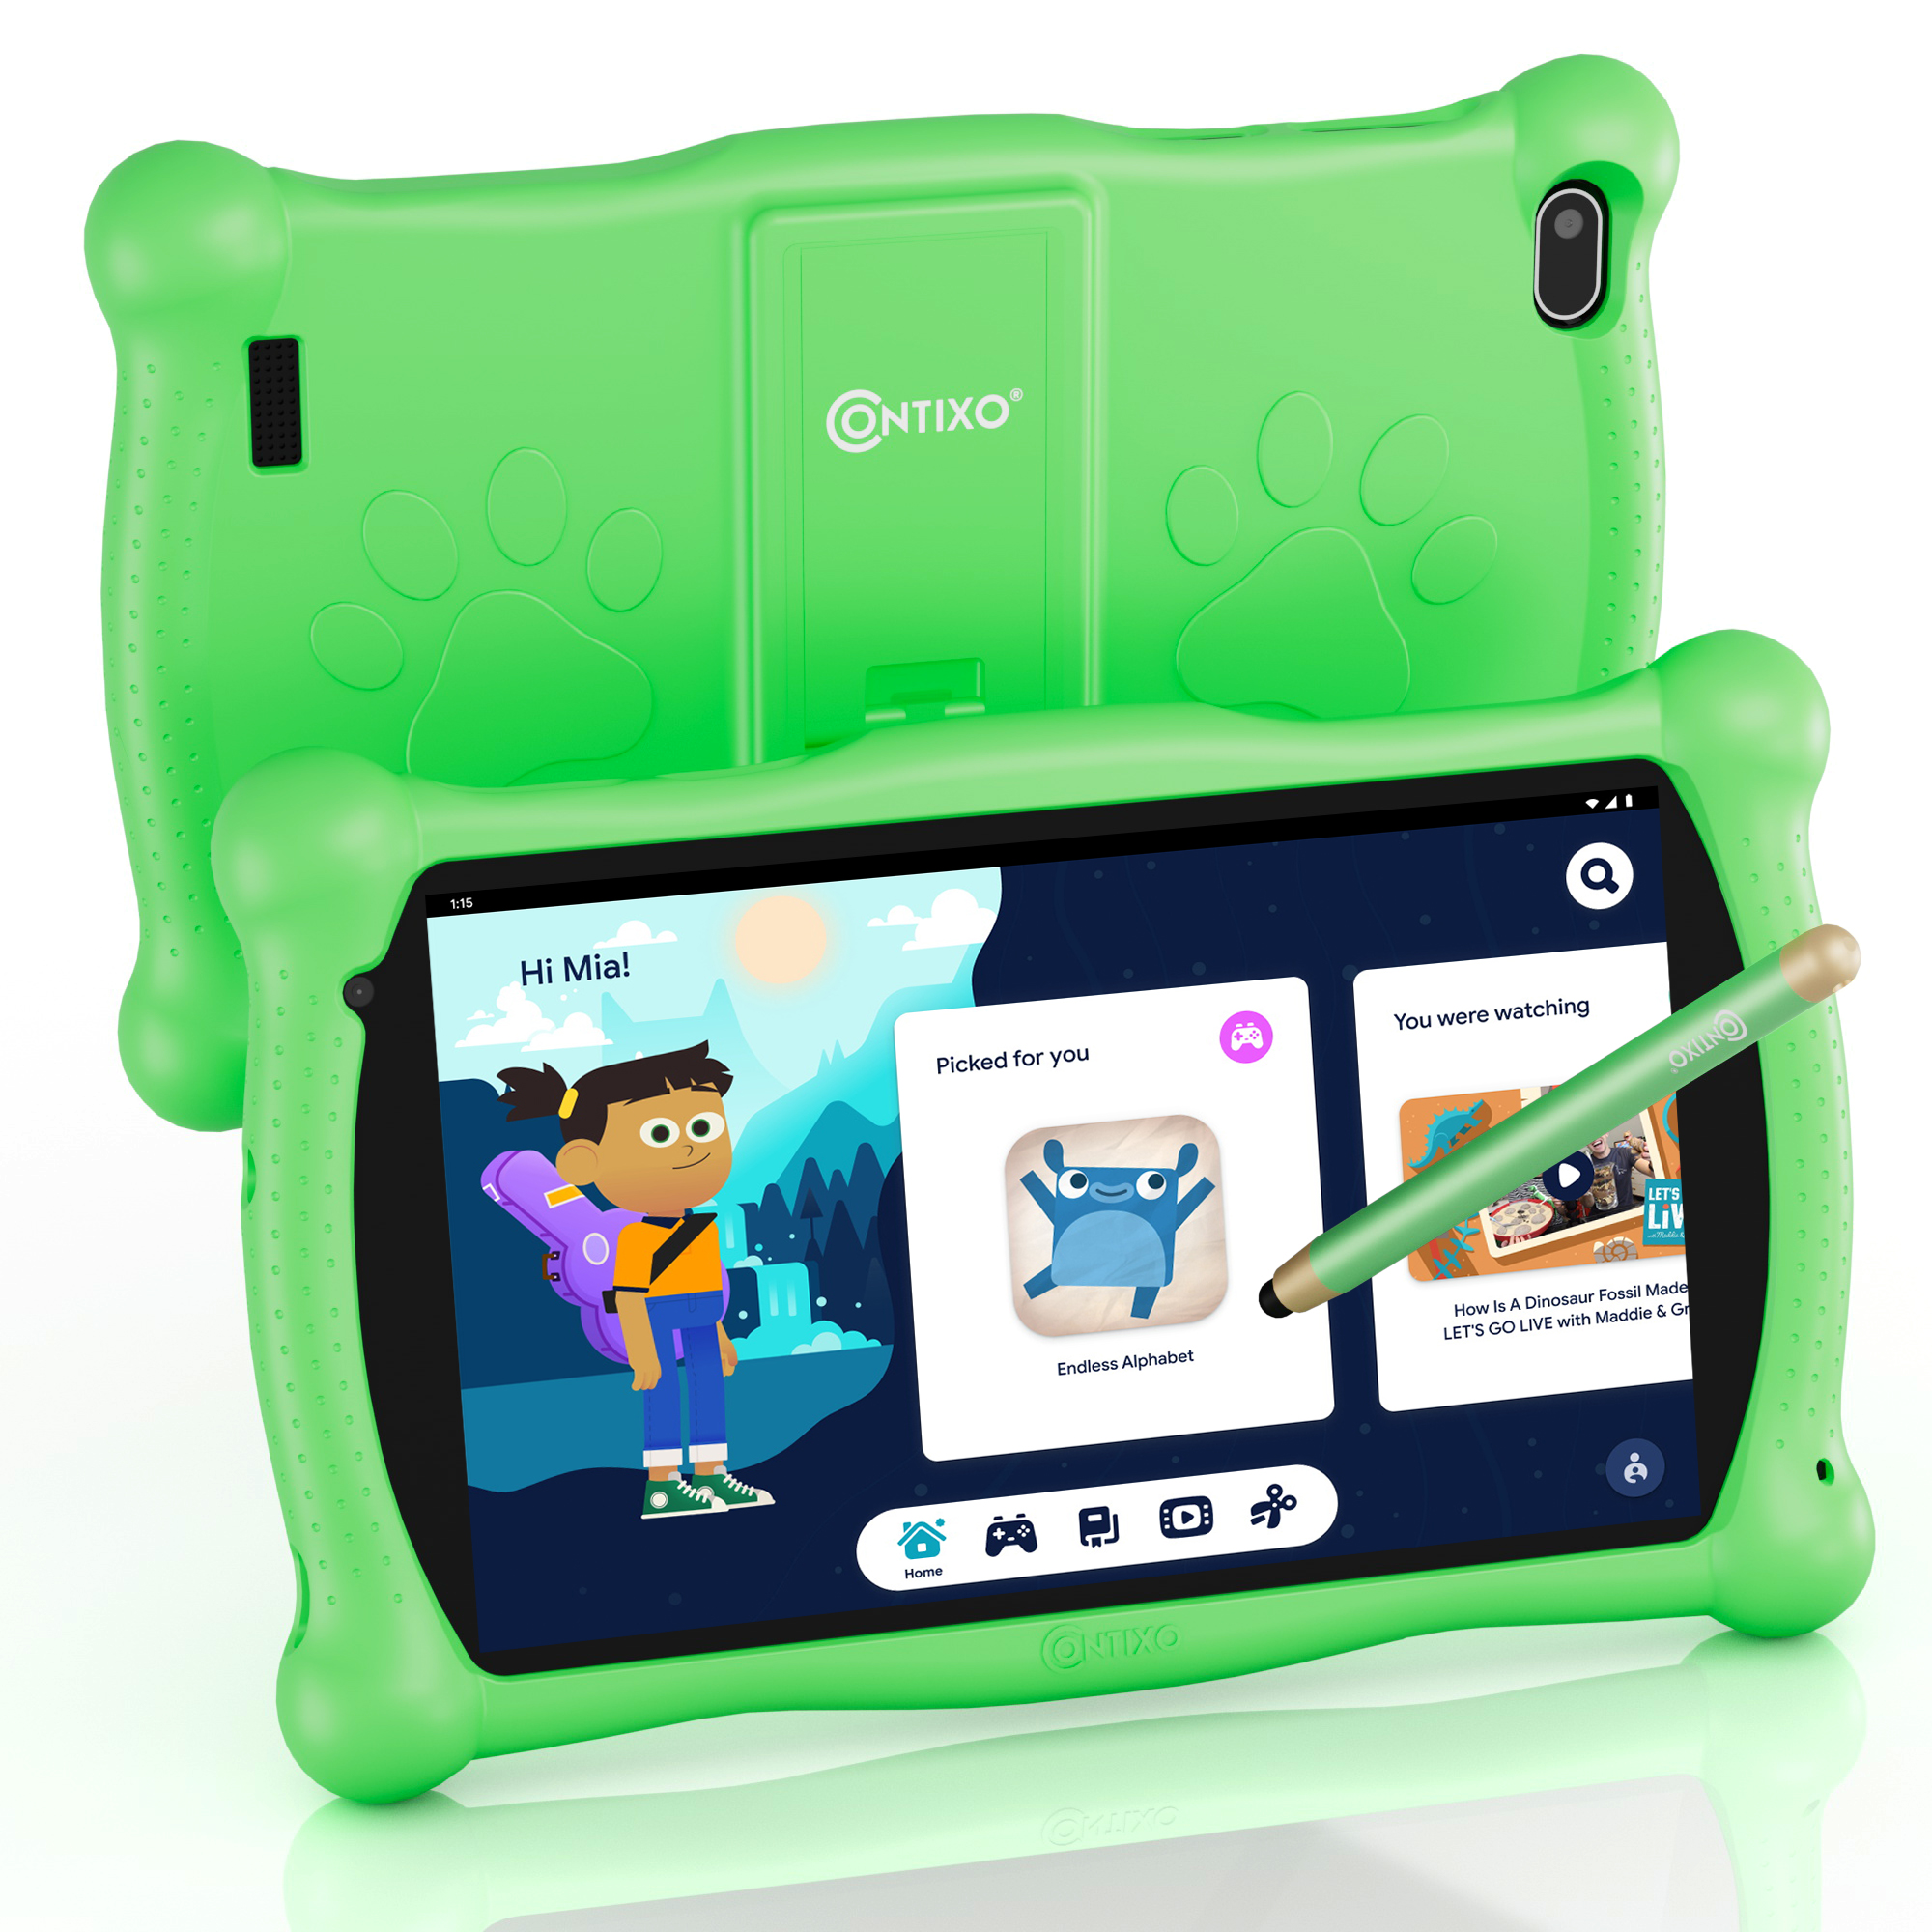 Contixo 7" Kids Learning Tablet HD Touch Screen, WiFi, Android 11, 2GB RAM, 32GB ROM, Protective Case with Kickstand, Age 3-9, V8-3-ST Green - image 1 of 8